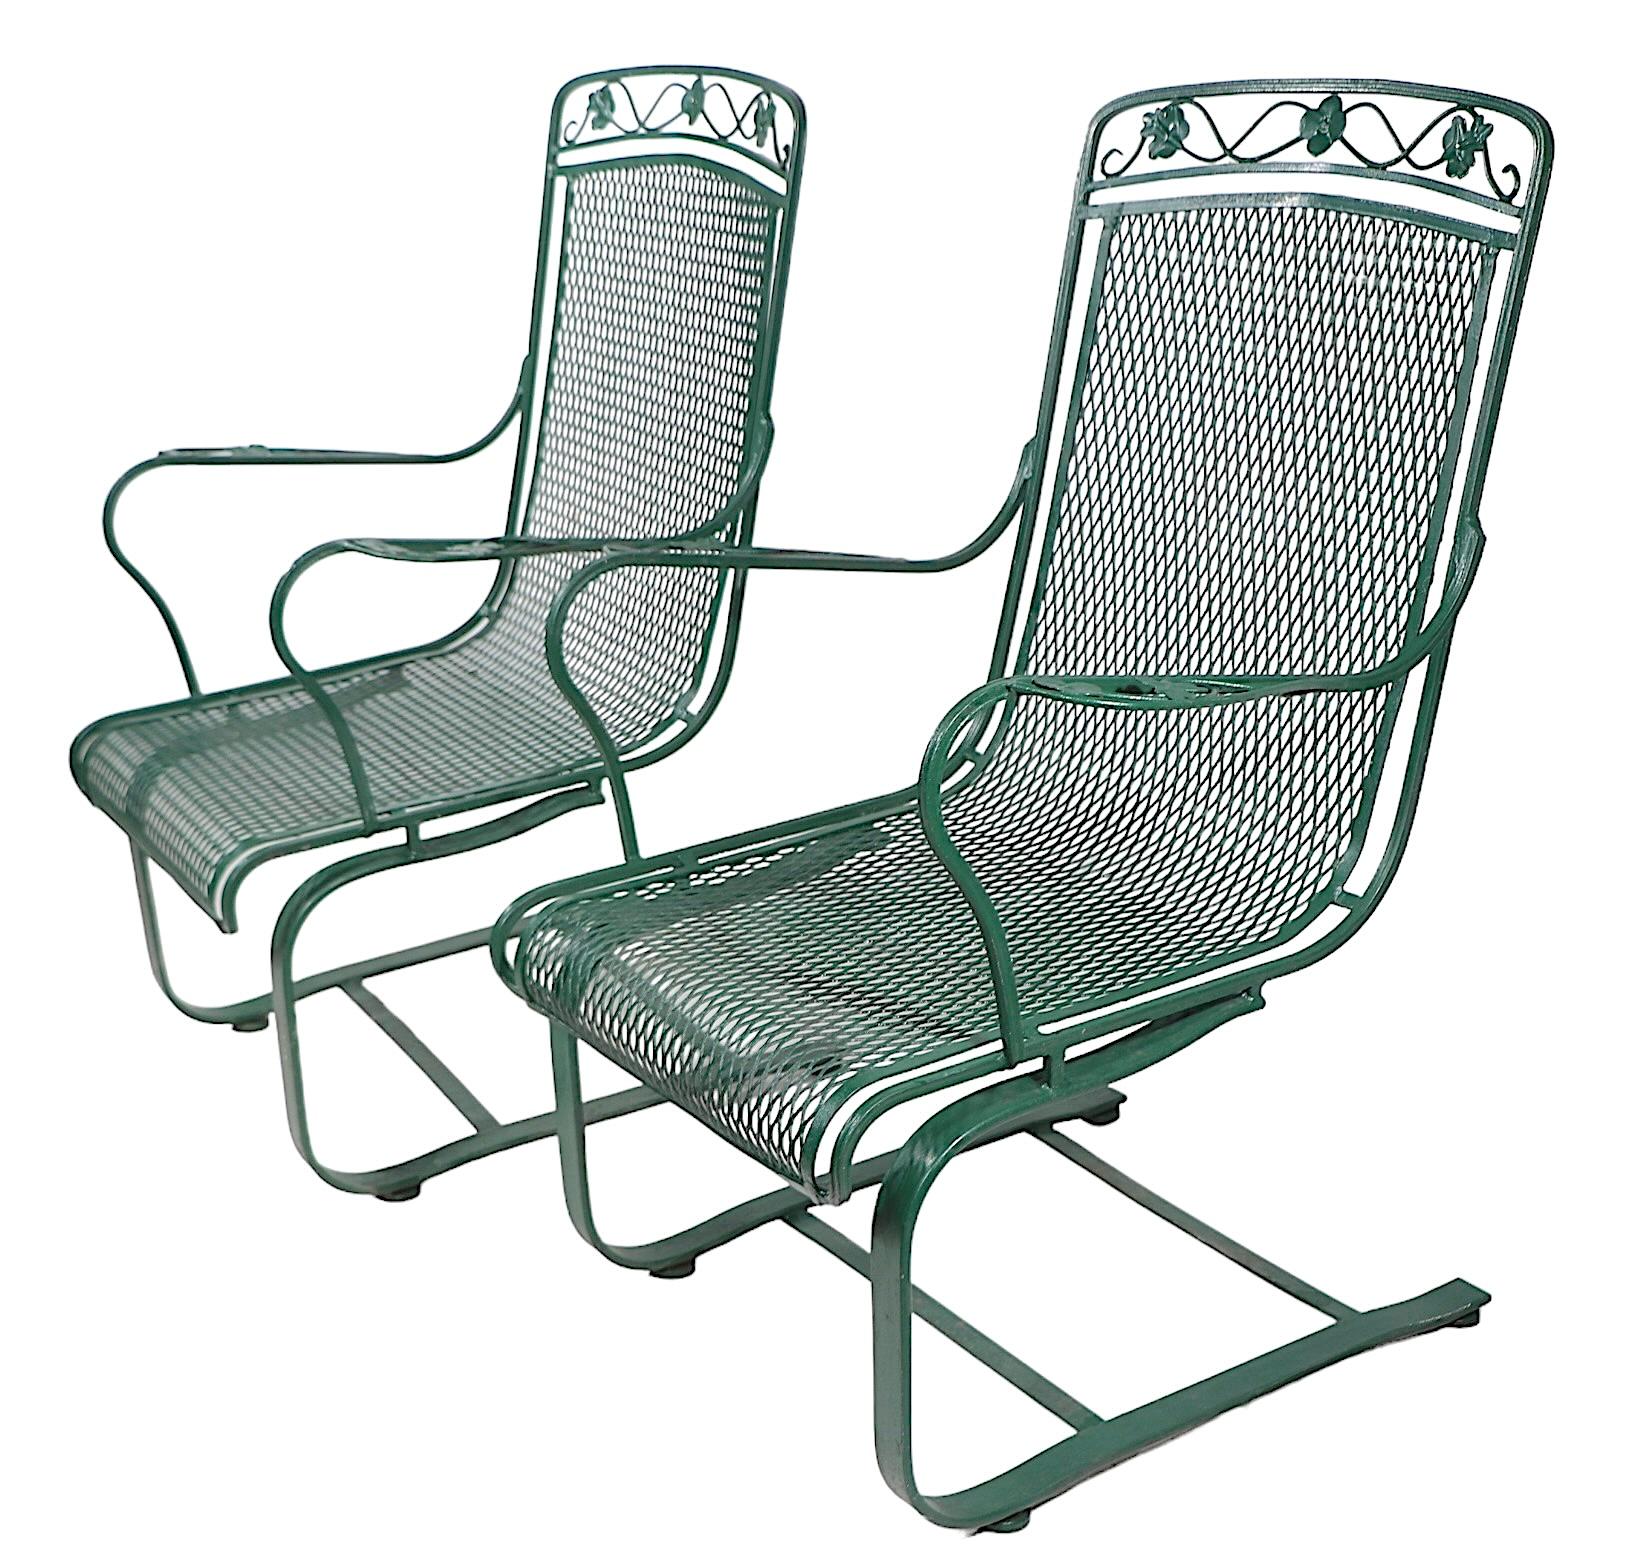 Pr. Cantilevered  Meadowcraft Dogwood Wrought Iron Lounge Chairs  For Sale 3